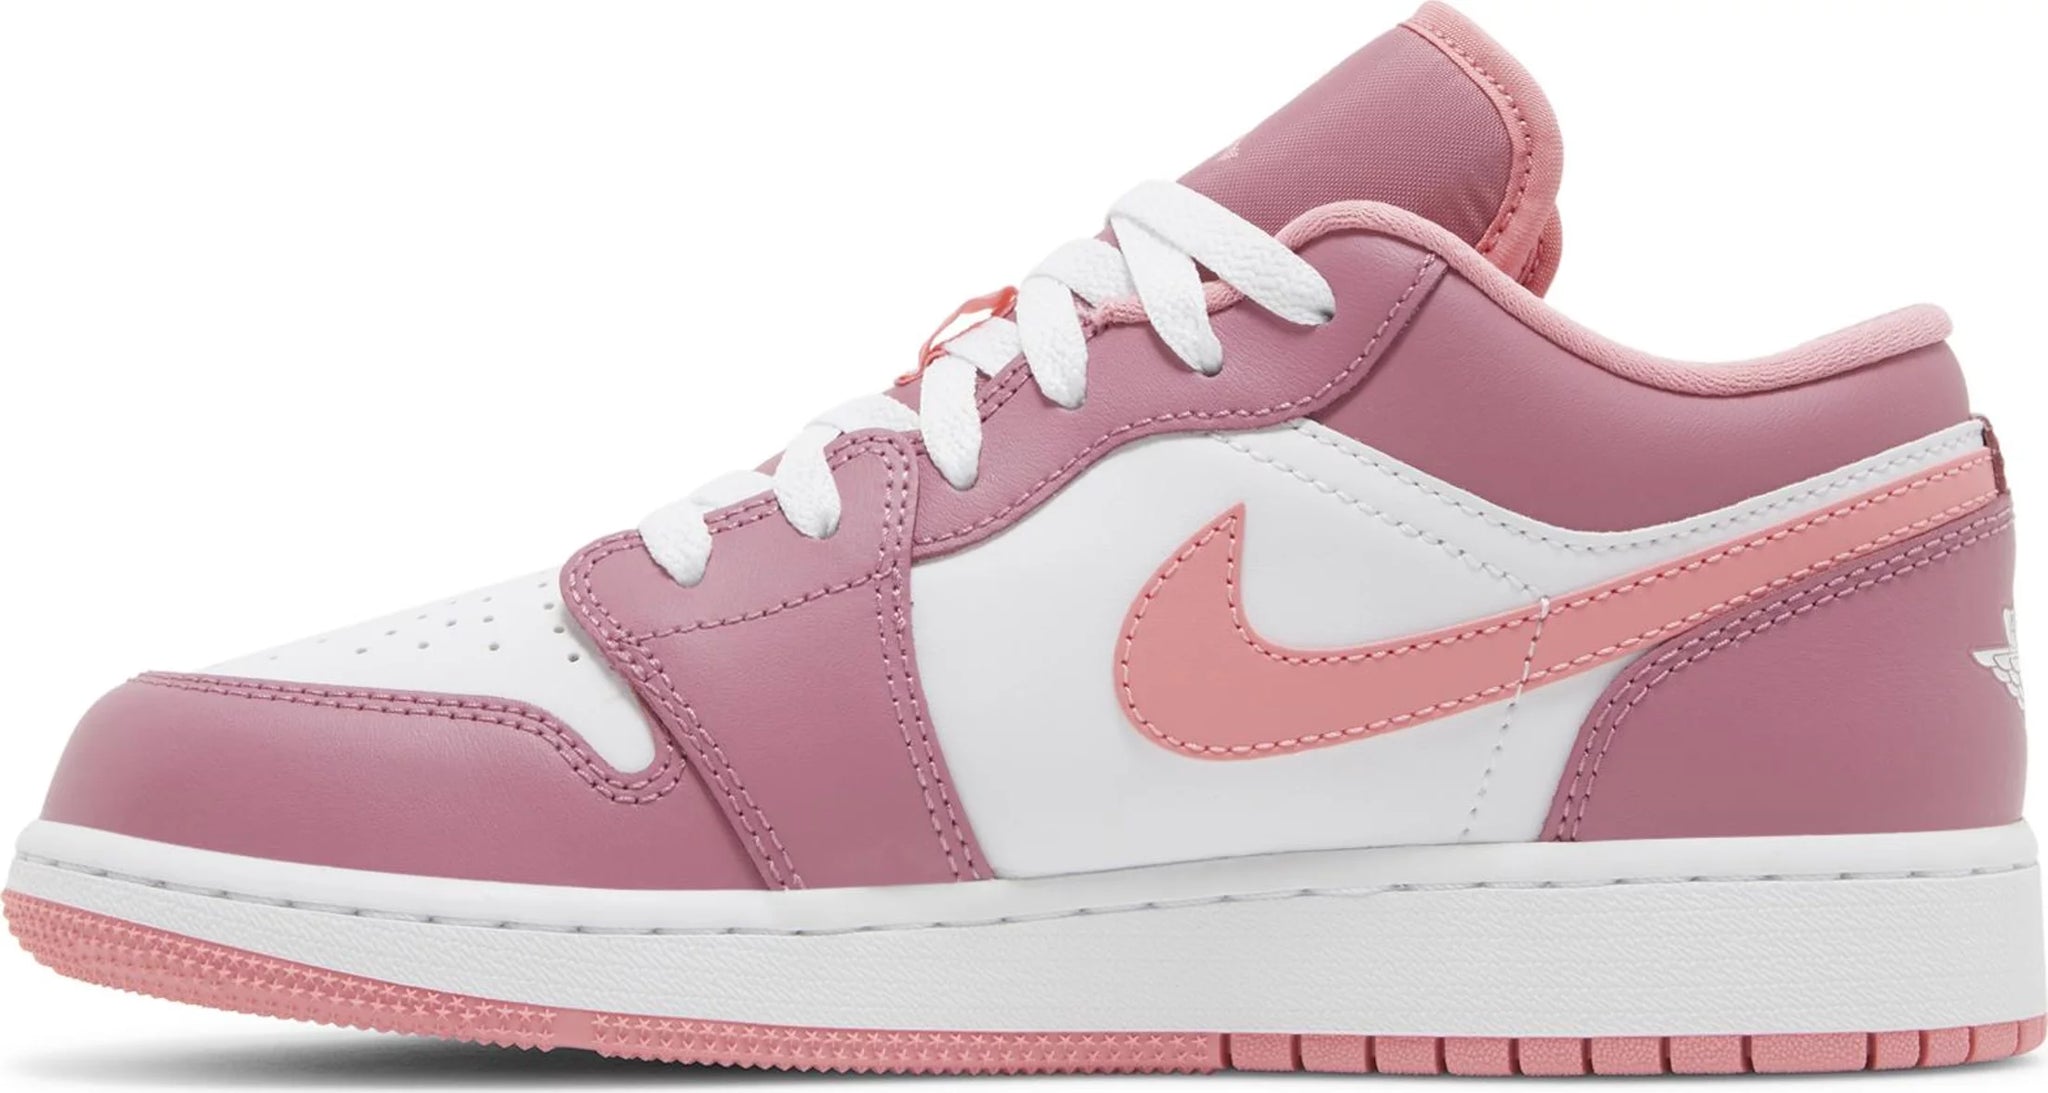 Double Boxed  299.99 Nike Air Jordan 1 Low Arctic Pink (GS) Double Boxed